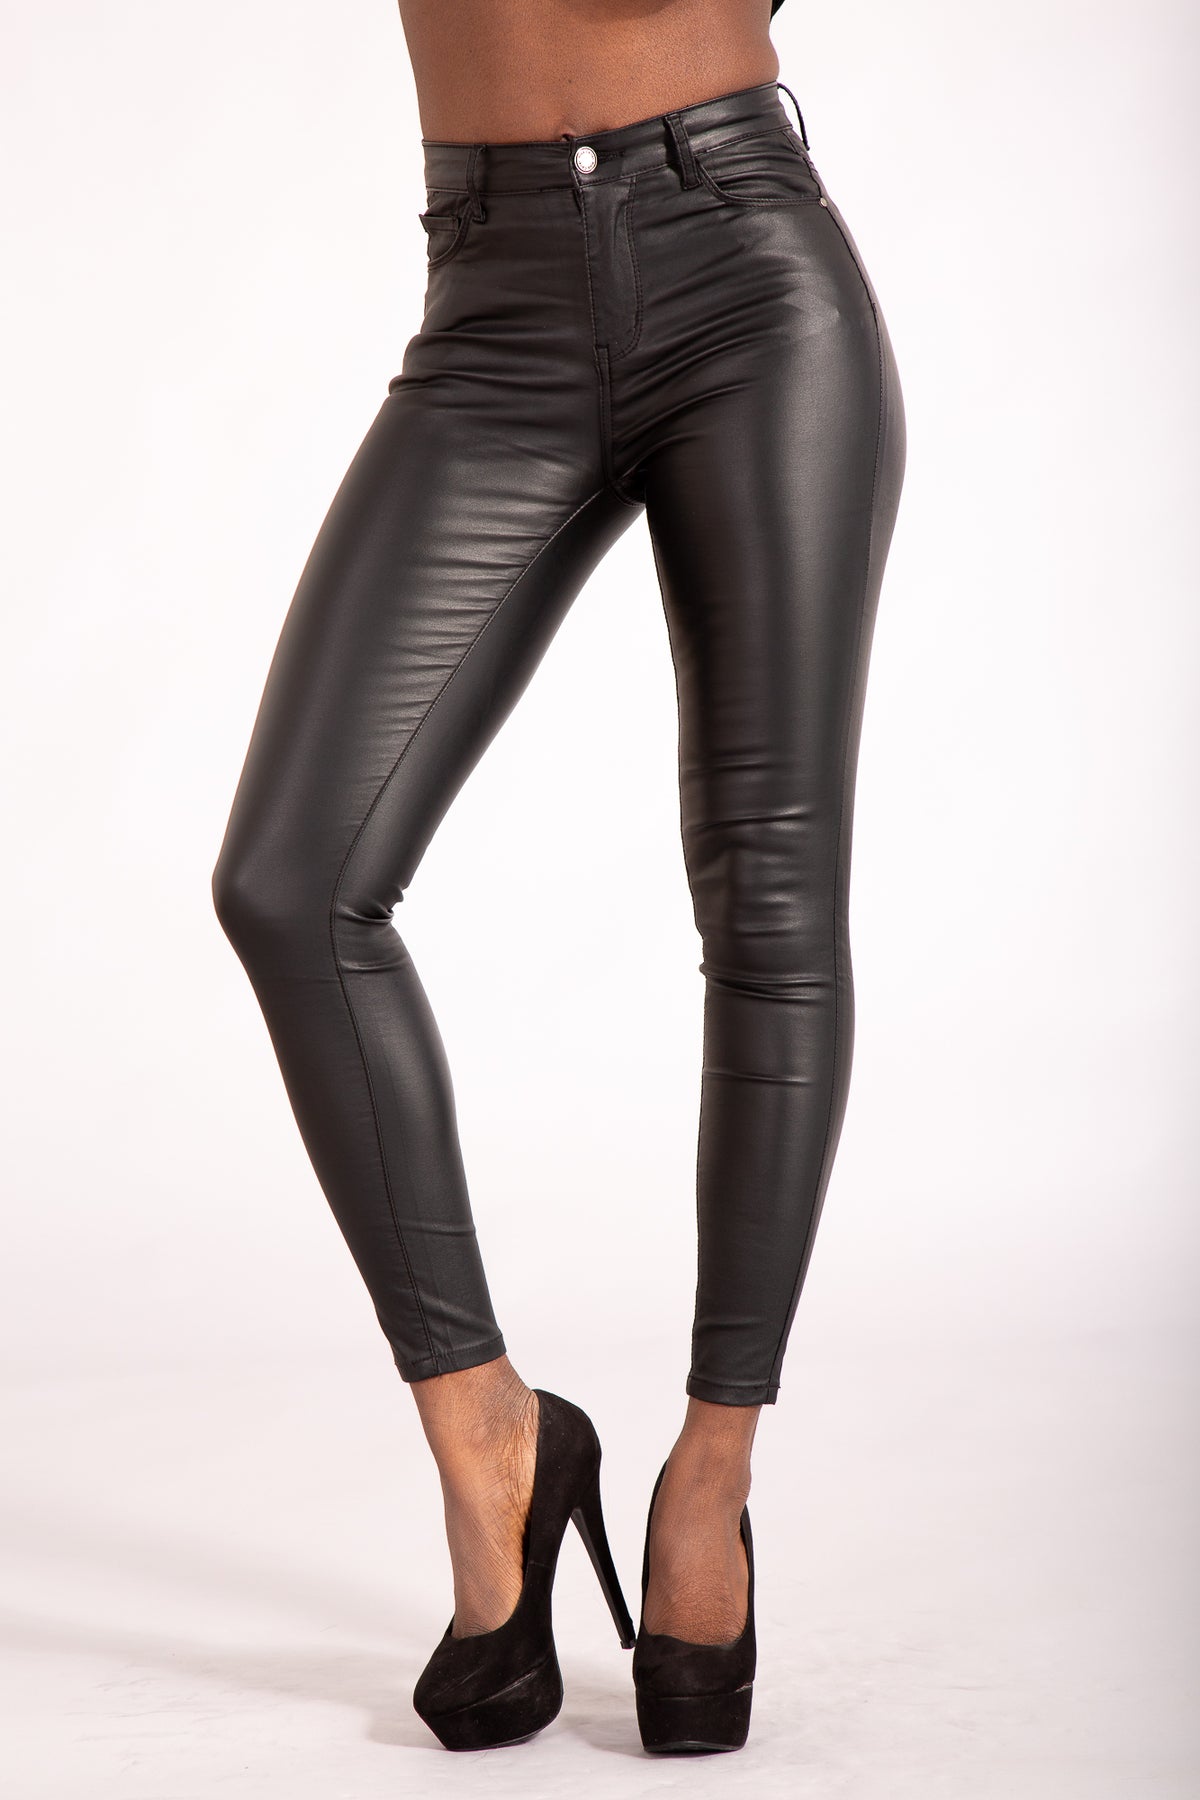 Comfortable Kandy Black Leather Look Leggings for Women – Lusty Chic